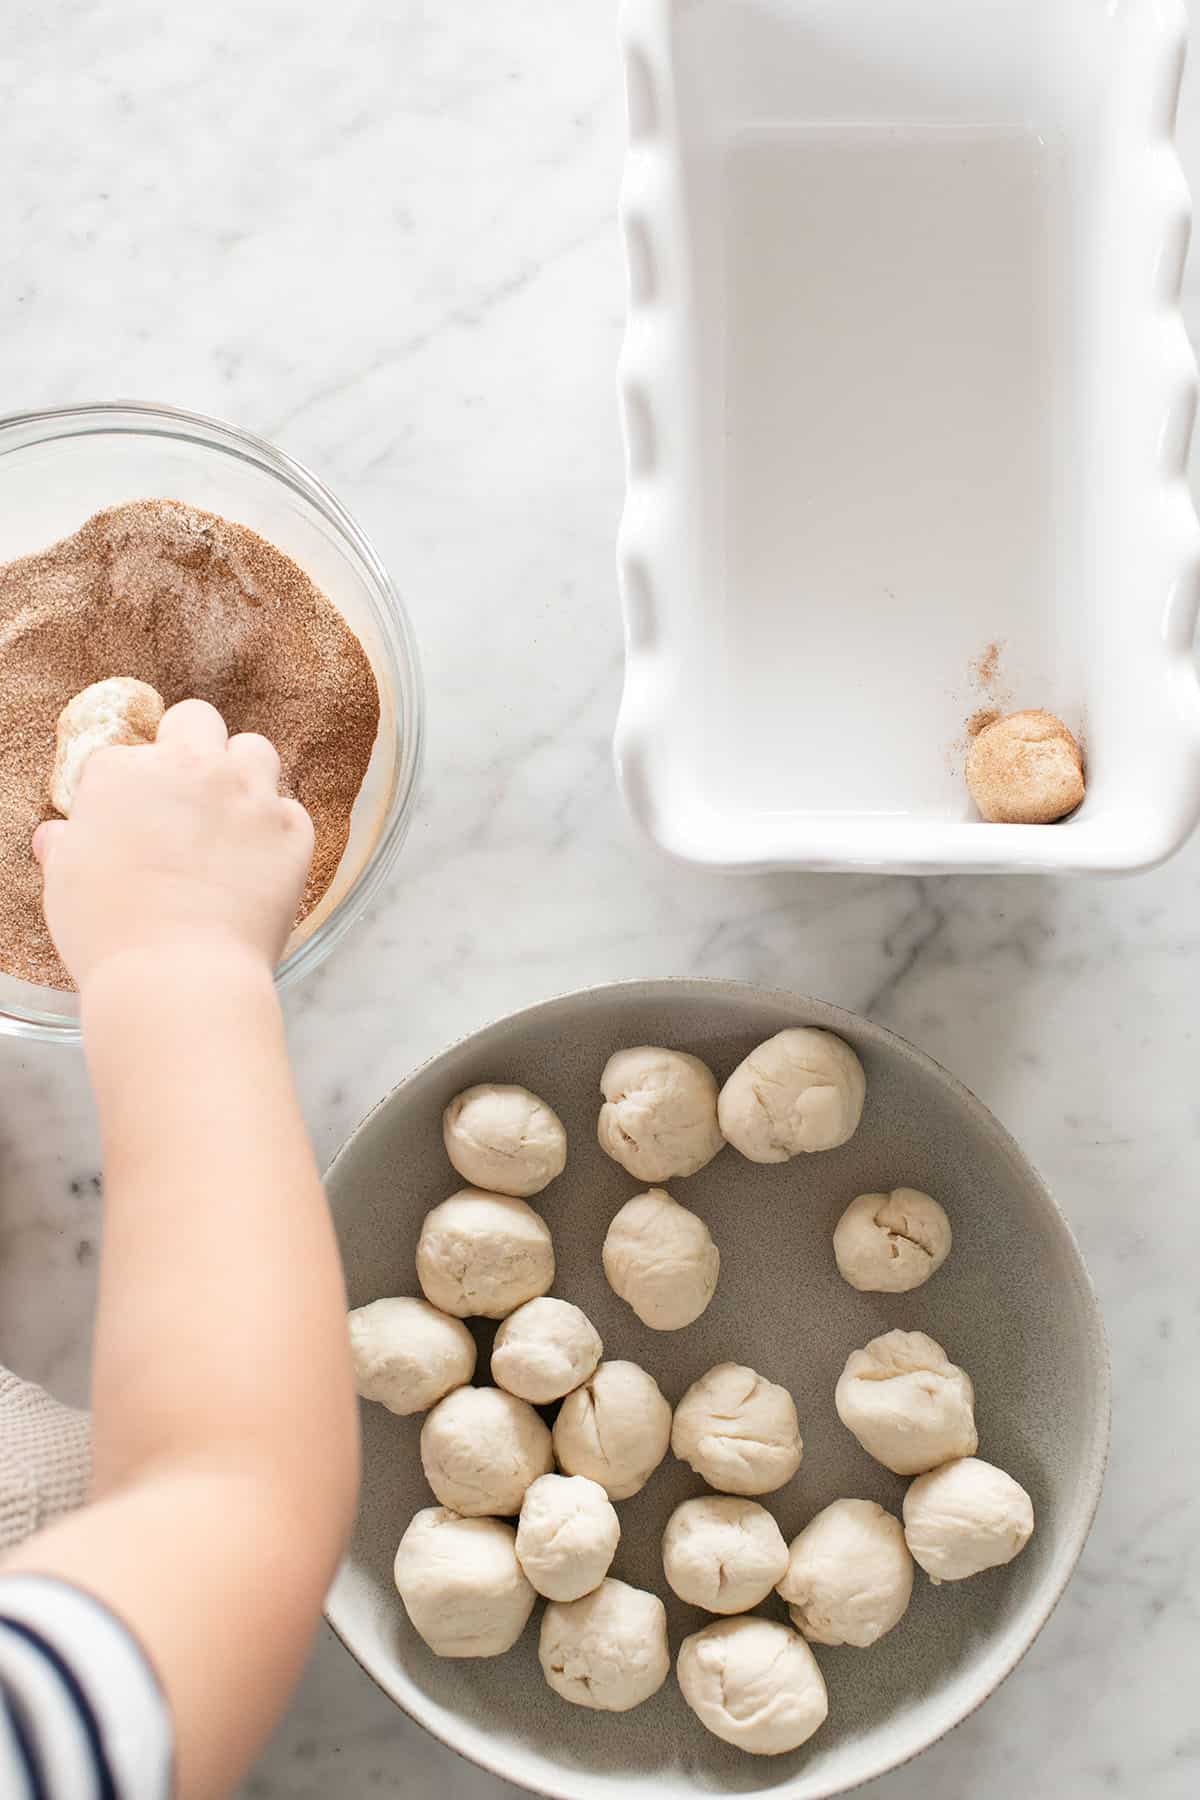 Kids making easy monkey bread by rolling small dough balls into butter, cinnamon and sugar.